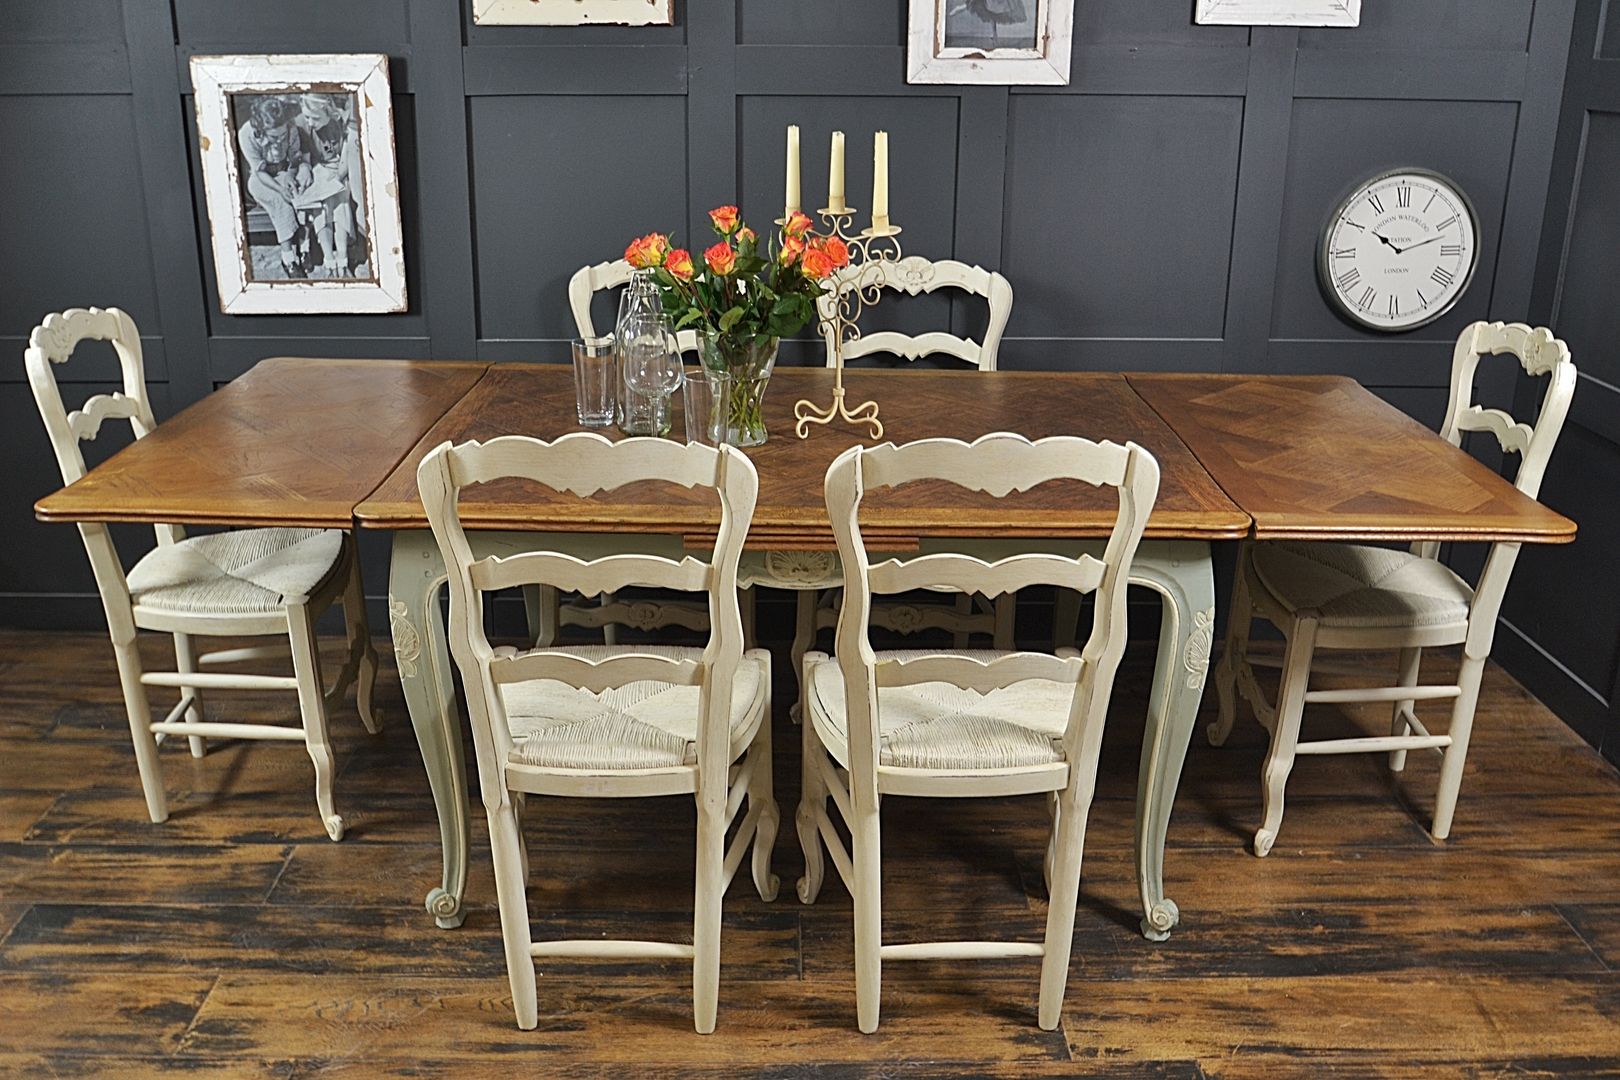 Shabby Chic French Oak Dining Table with 6 Chairs in Rococo, The Treasure Trove Shabby Chic & Vintage Furniture The Treasure Trove Shabby Chic & Vintage Furniture Salle à manger classique Tables